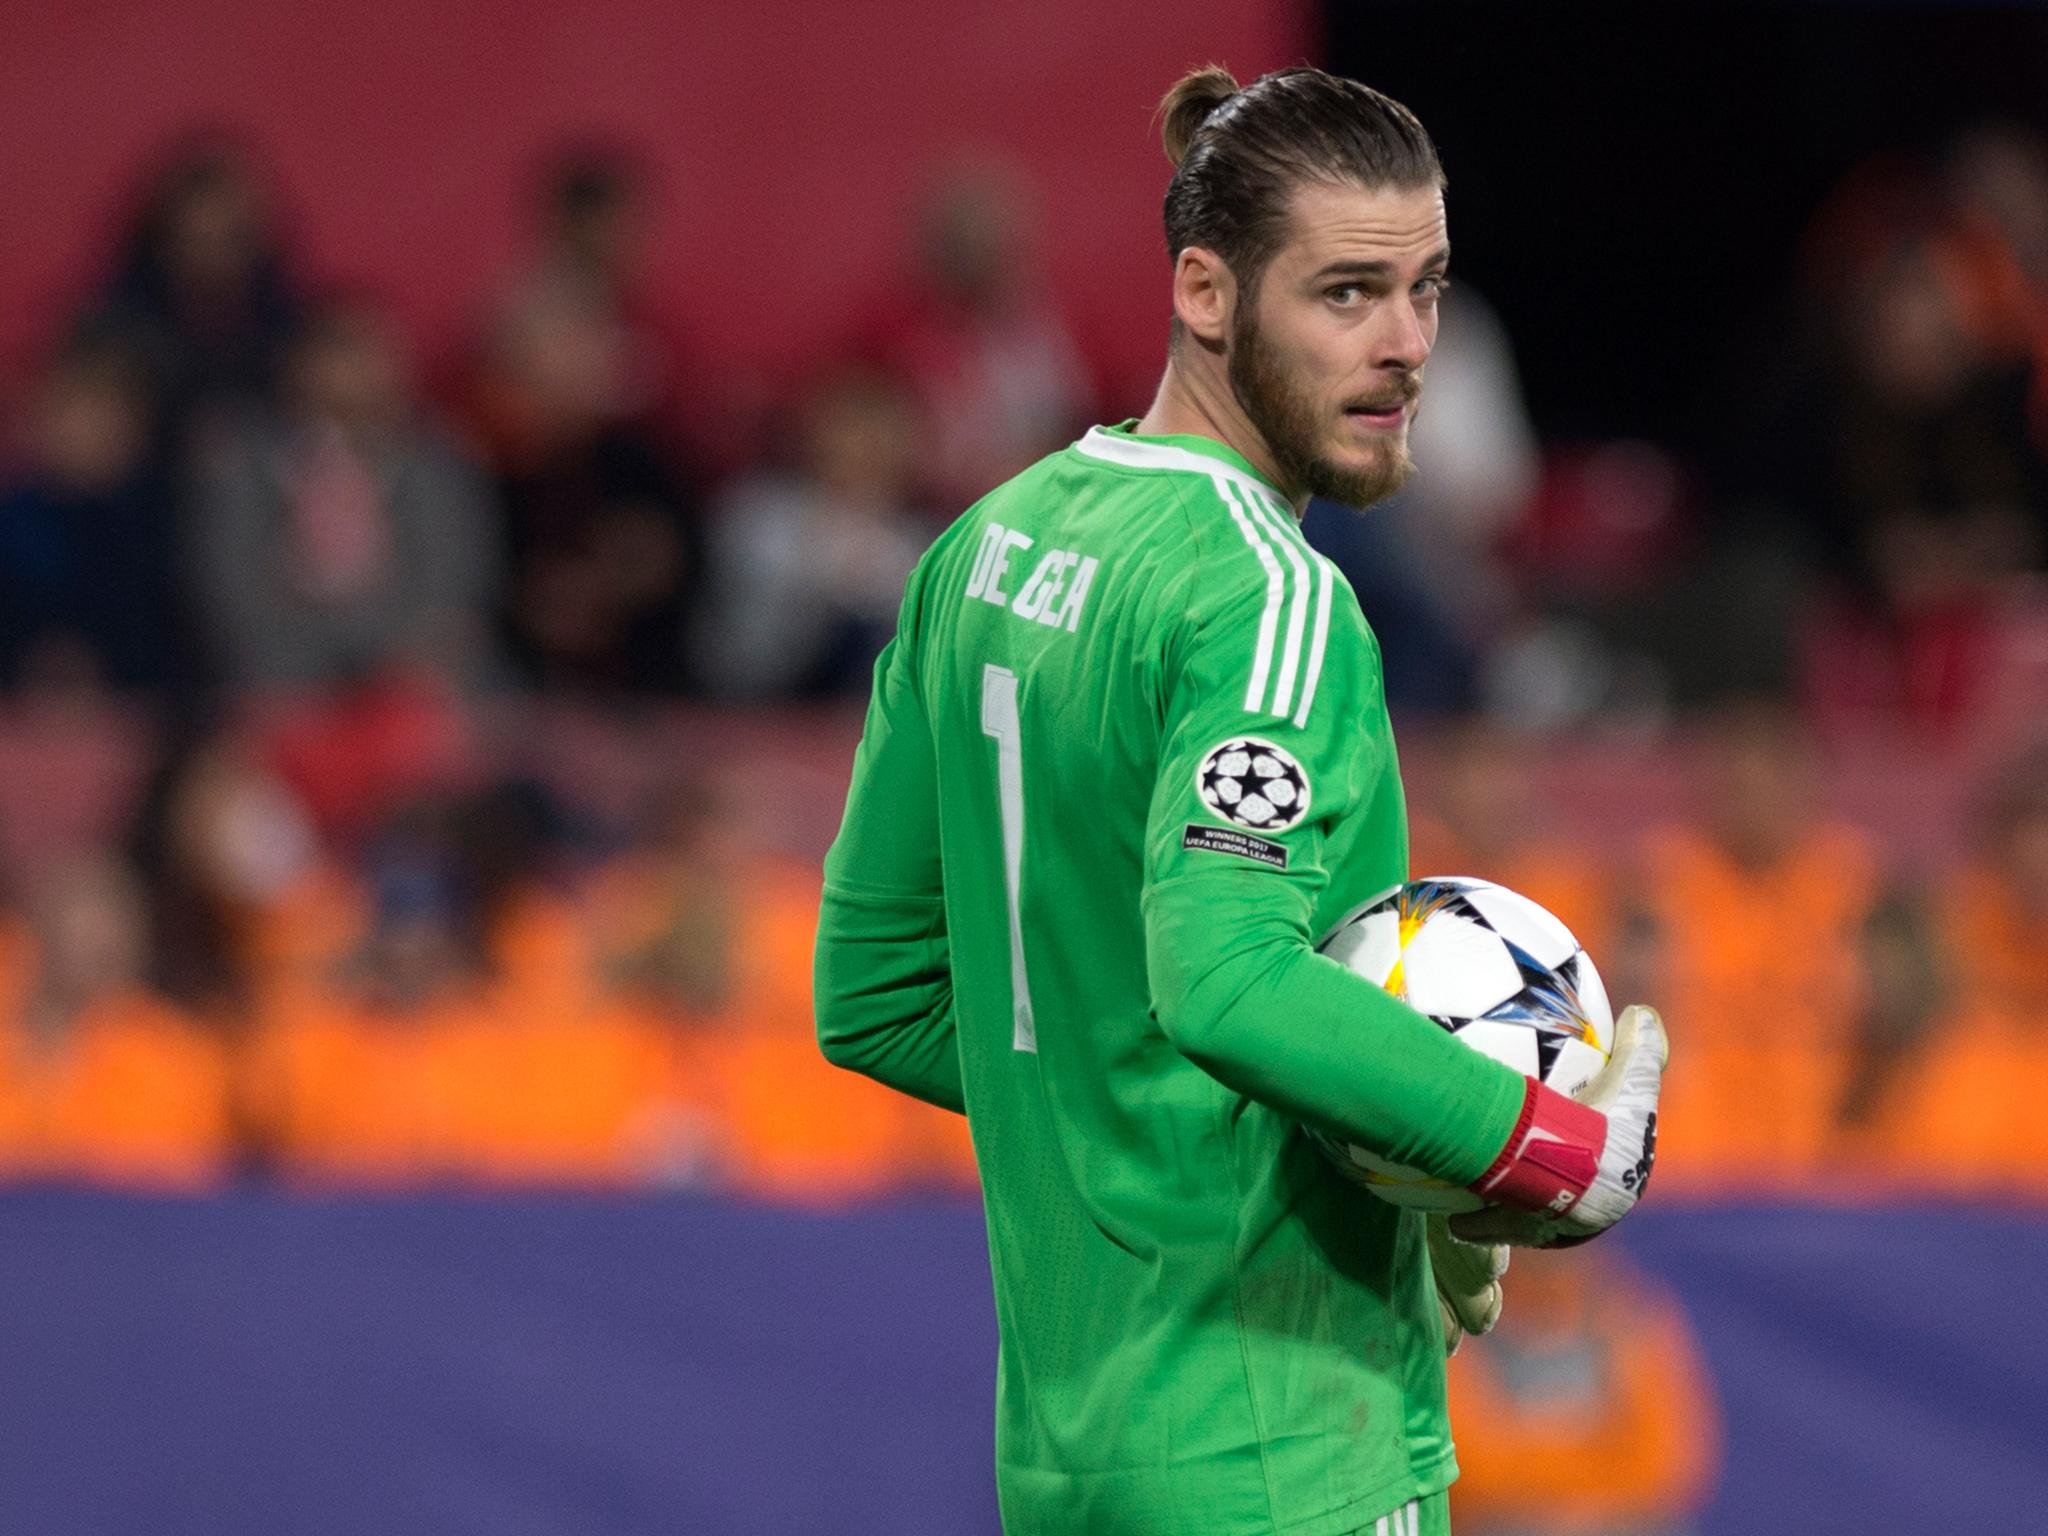 David de Gea has proven himself as one of Manchester United's best players - but that wasn't always the case